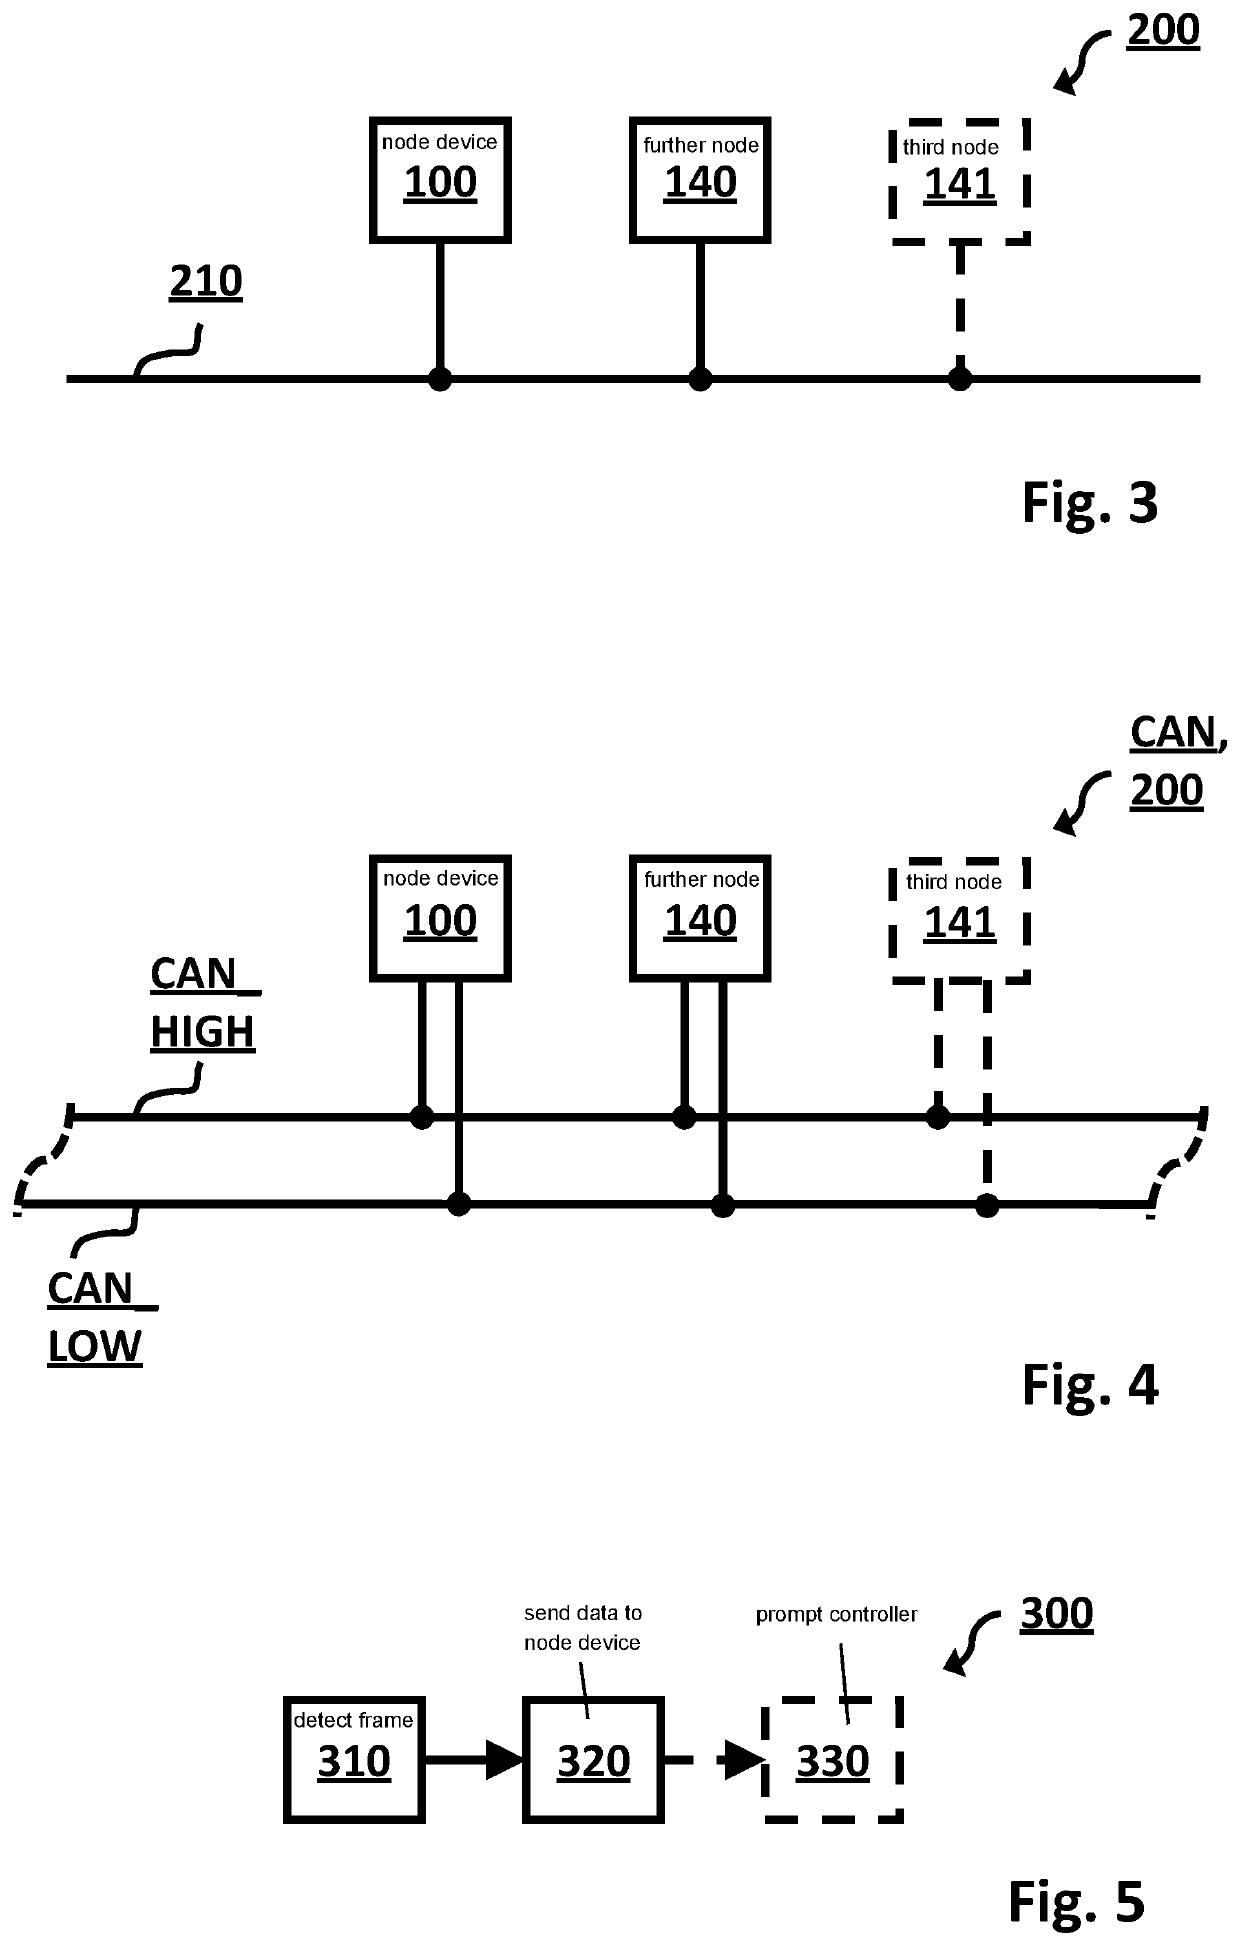 Frame invalidation in the bus system including intrusion detection system